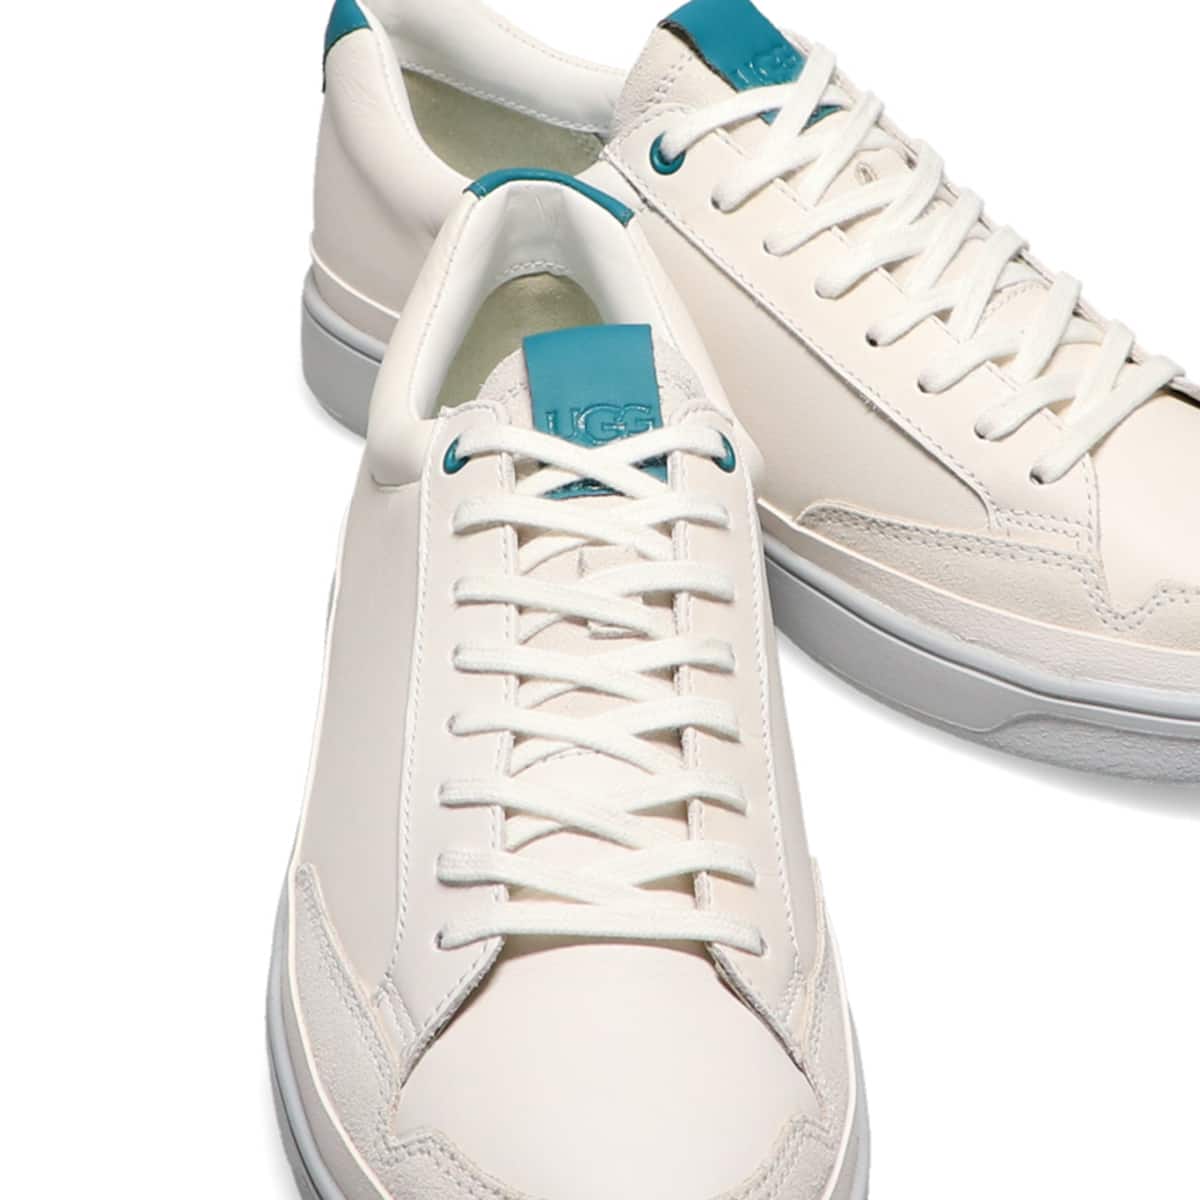 UGG SOUTH BAY SNEAKER LOW White / Deep Teal 23SS-I